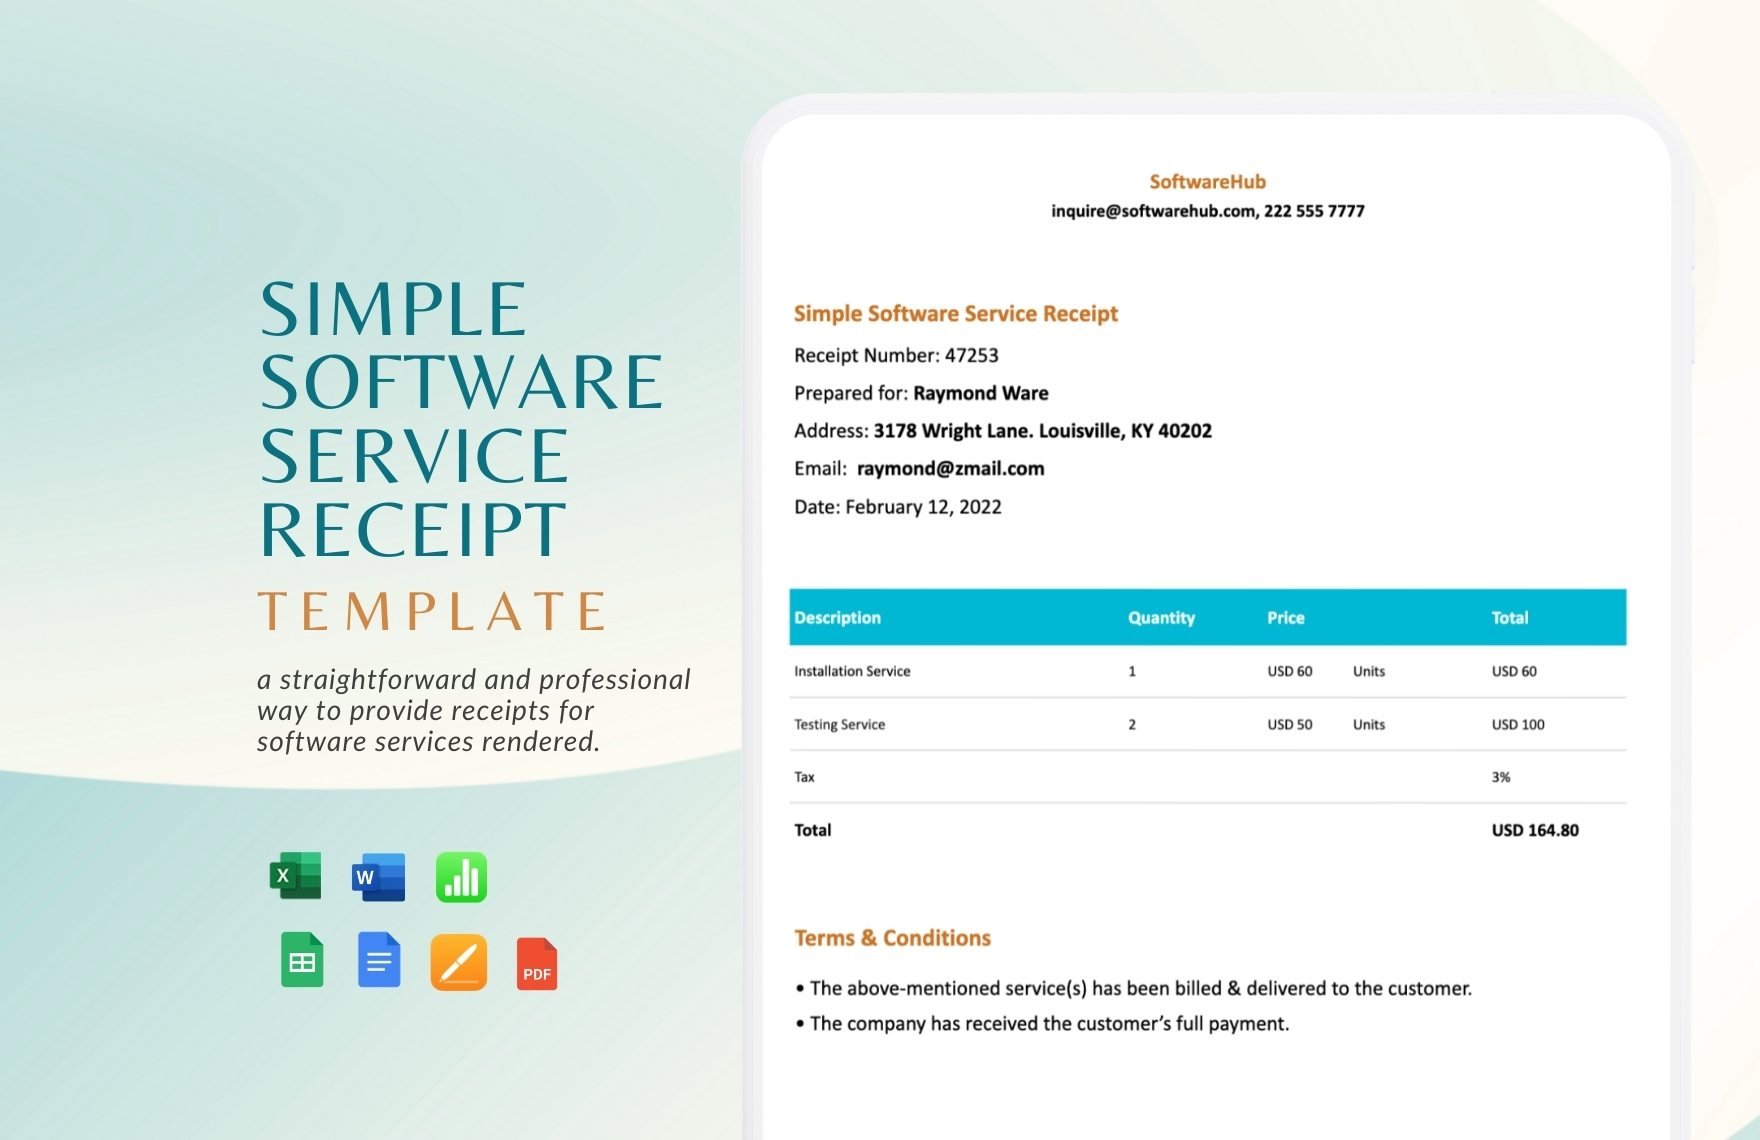 Simple Software Service Receipt Template in Word, Google Docs, Excel, PDF, Google Sheets, Apple Pages, Apple Numbers